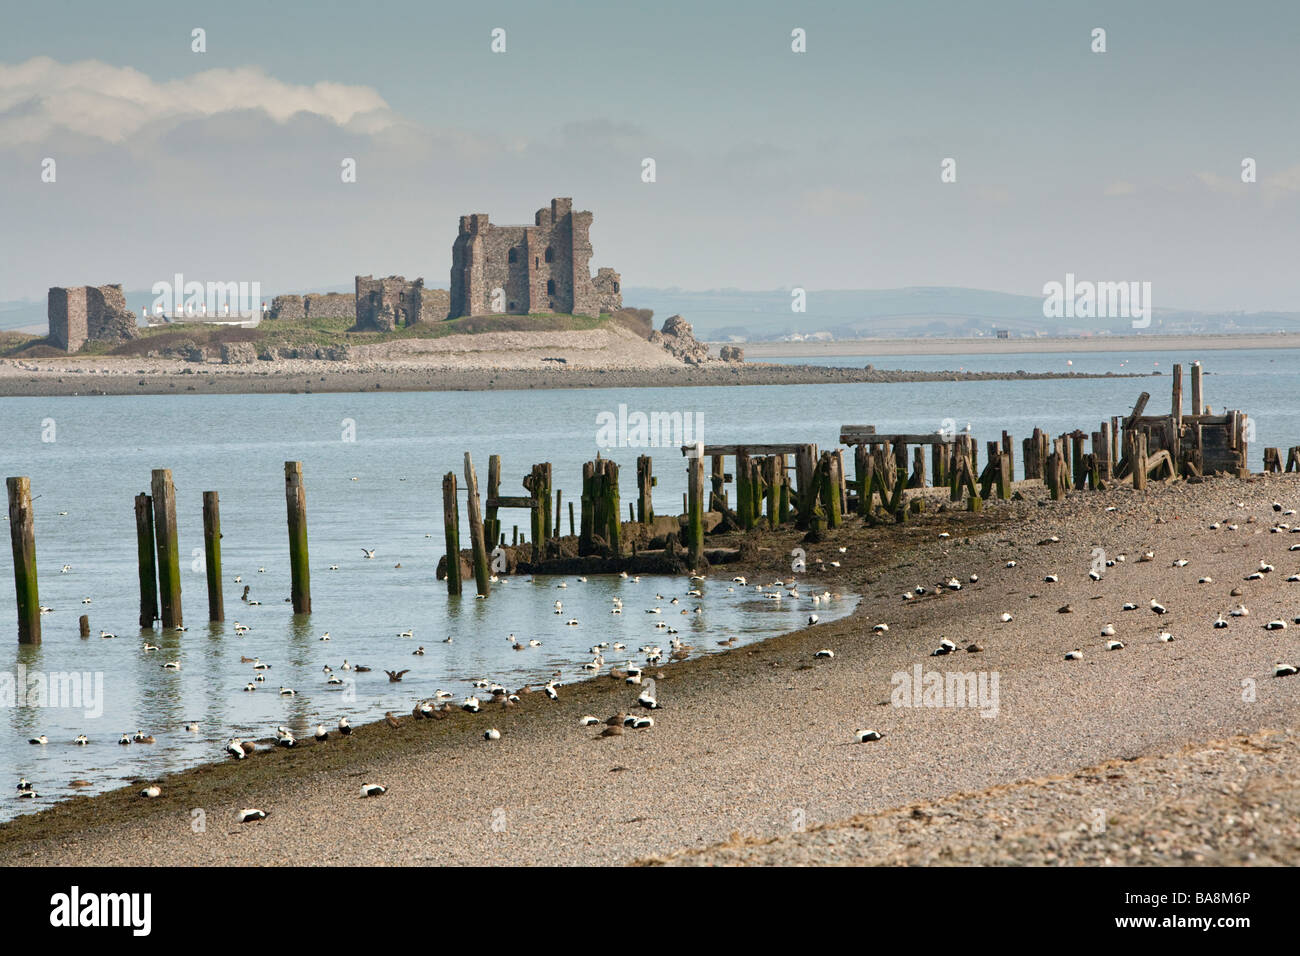 Eider Ducks on the beach at Walney Island with Peil Castle in the background Barrow in Furness Cumbria Uk Stock Photo